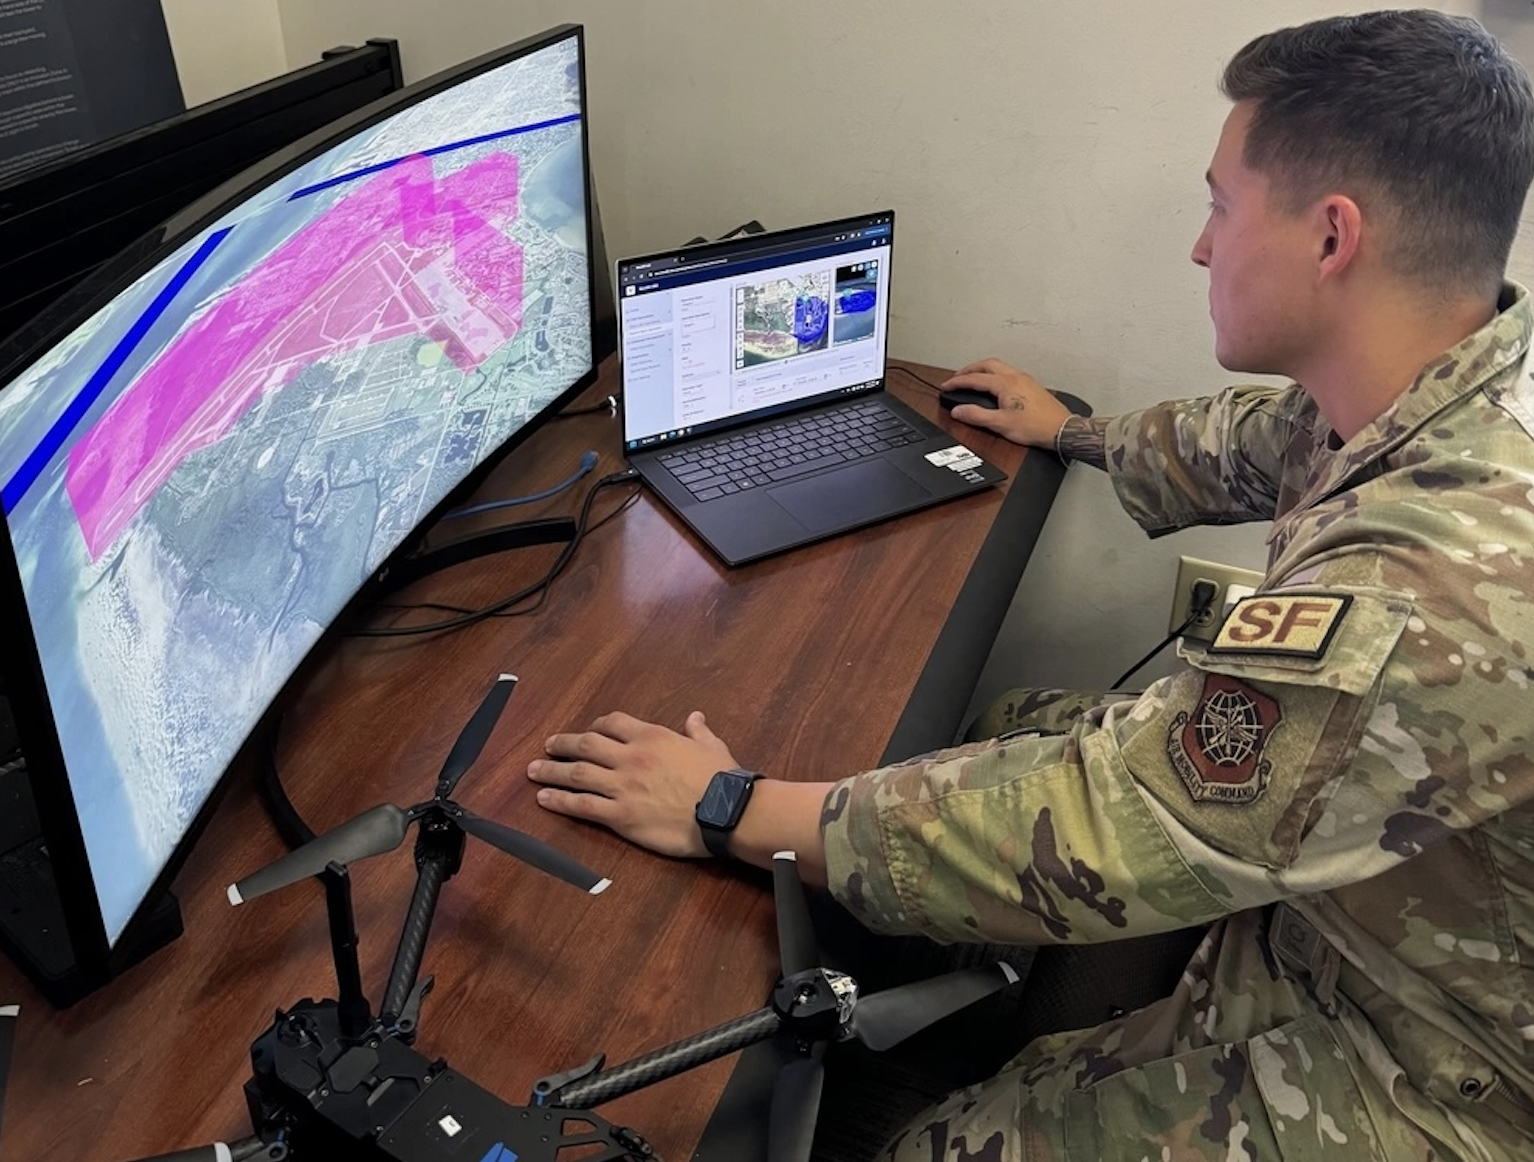 Air Traffic Control For Drones? Air Force Tests Out New System